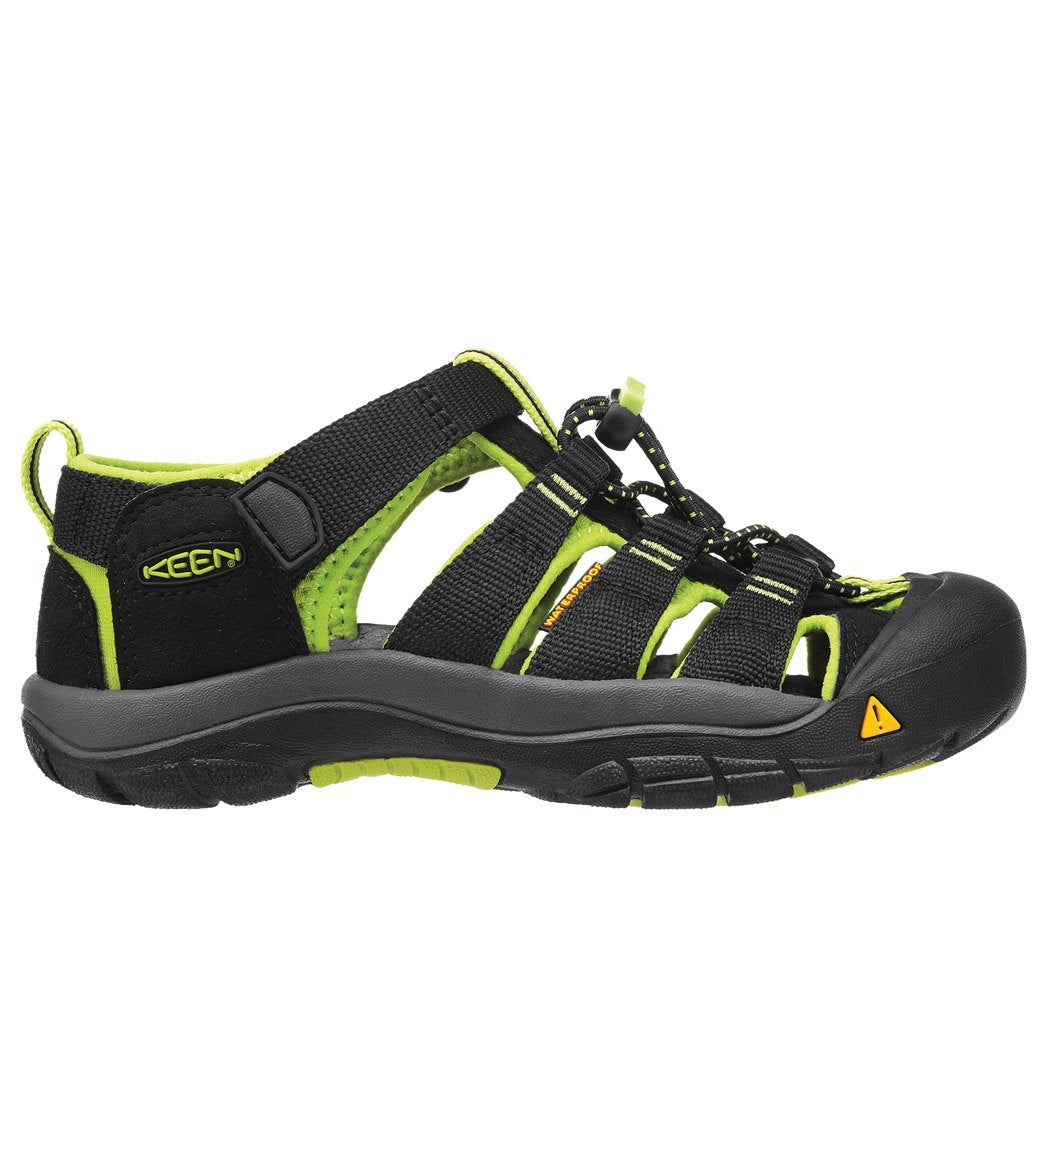 Keen Youths Newport H2 Water Shoes